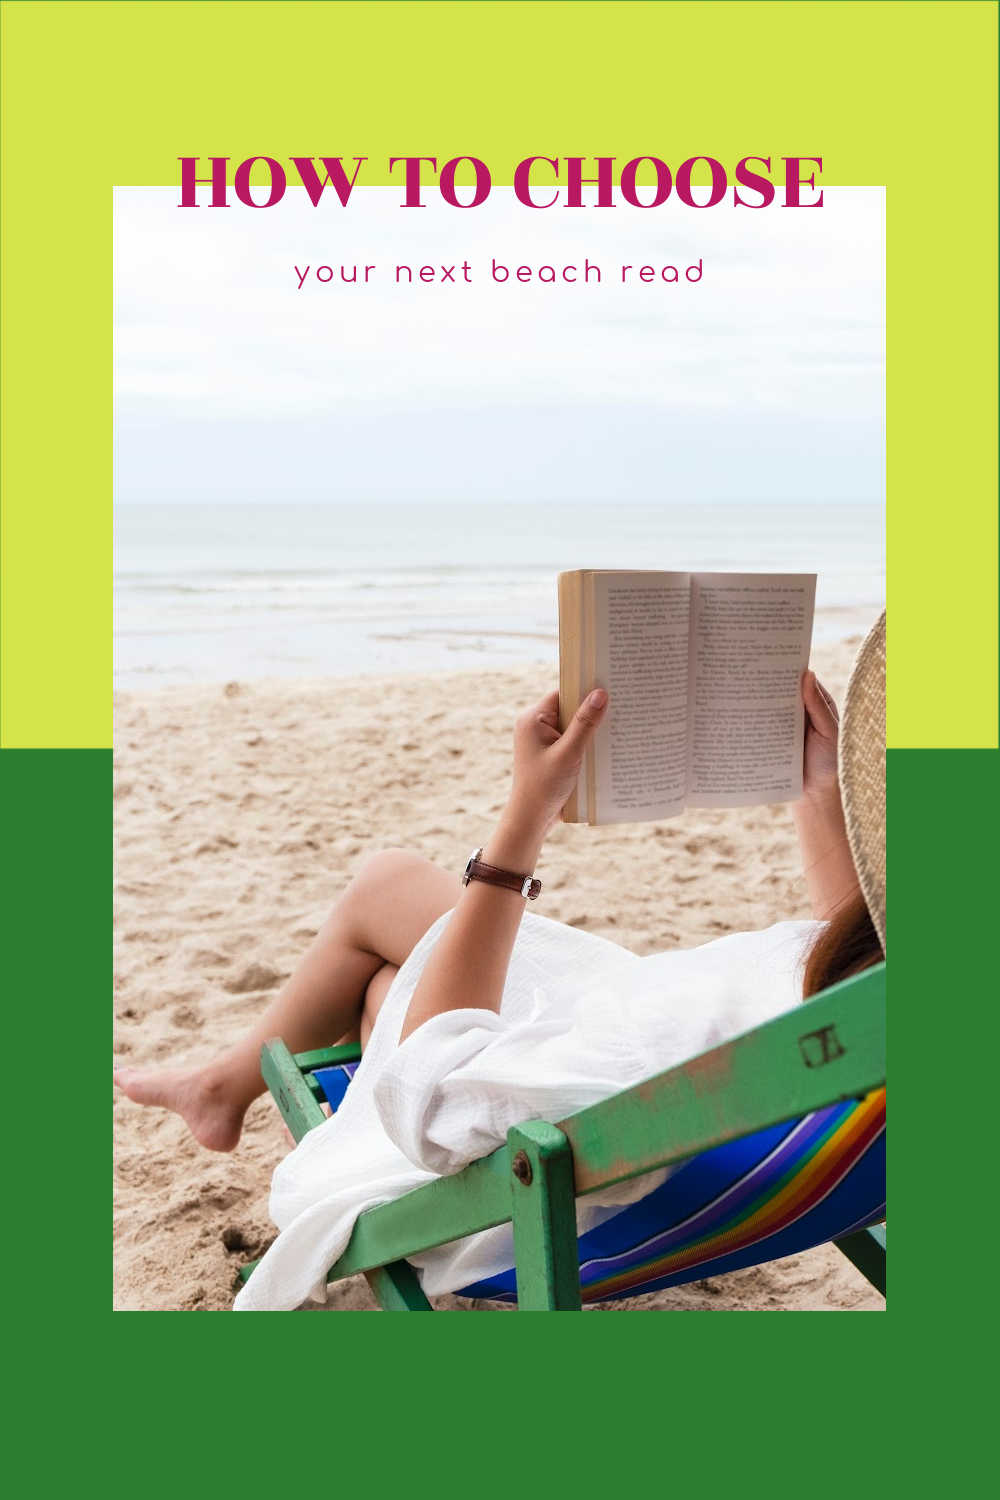 tips for choosing your next beach read